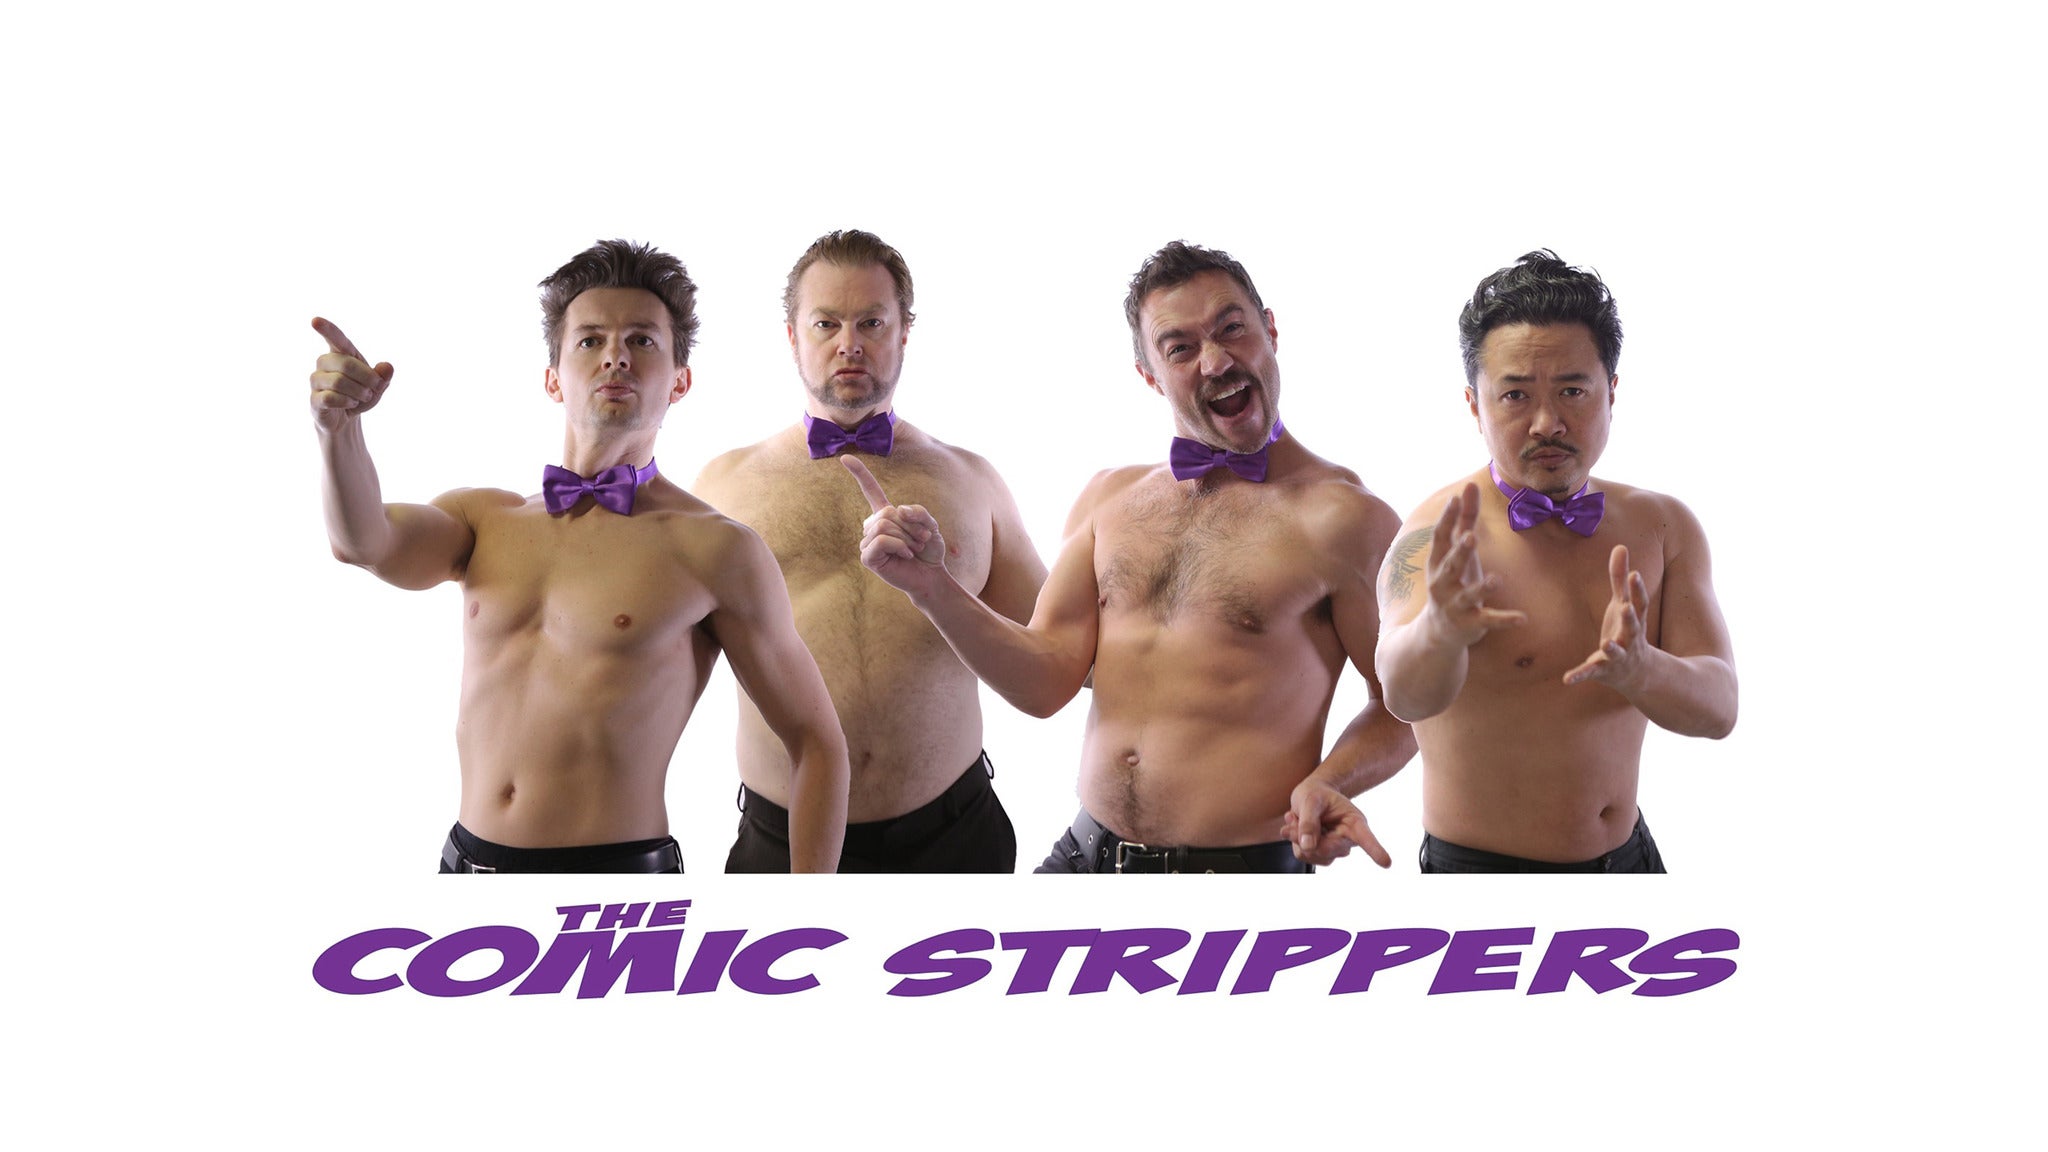 The Comic Strippers presale code for legit tickets in Lindsay